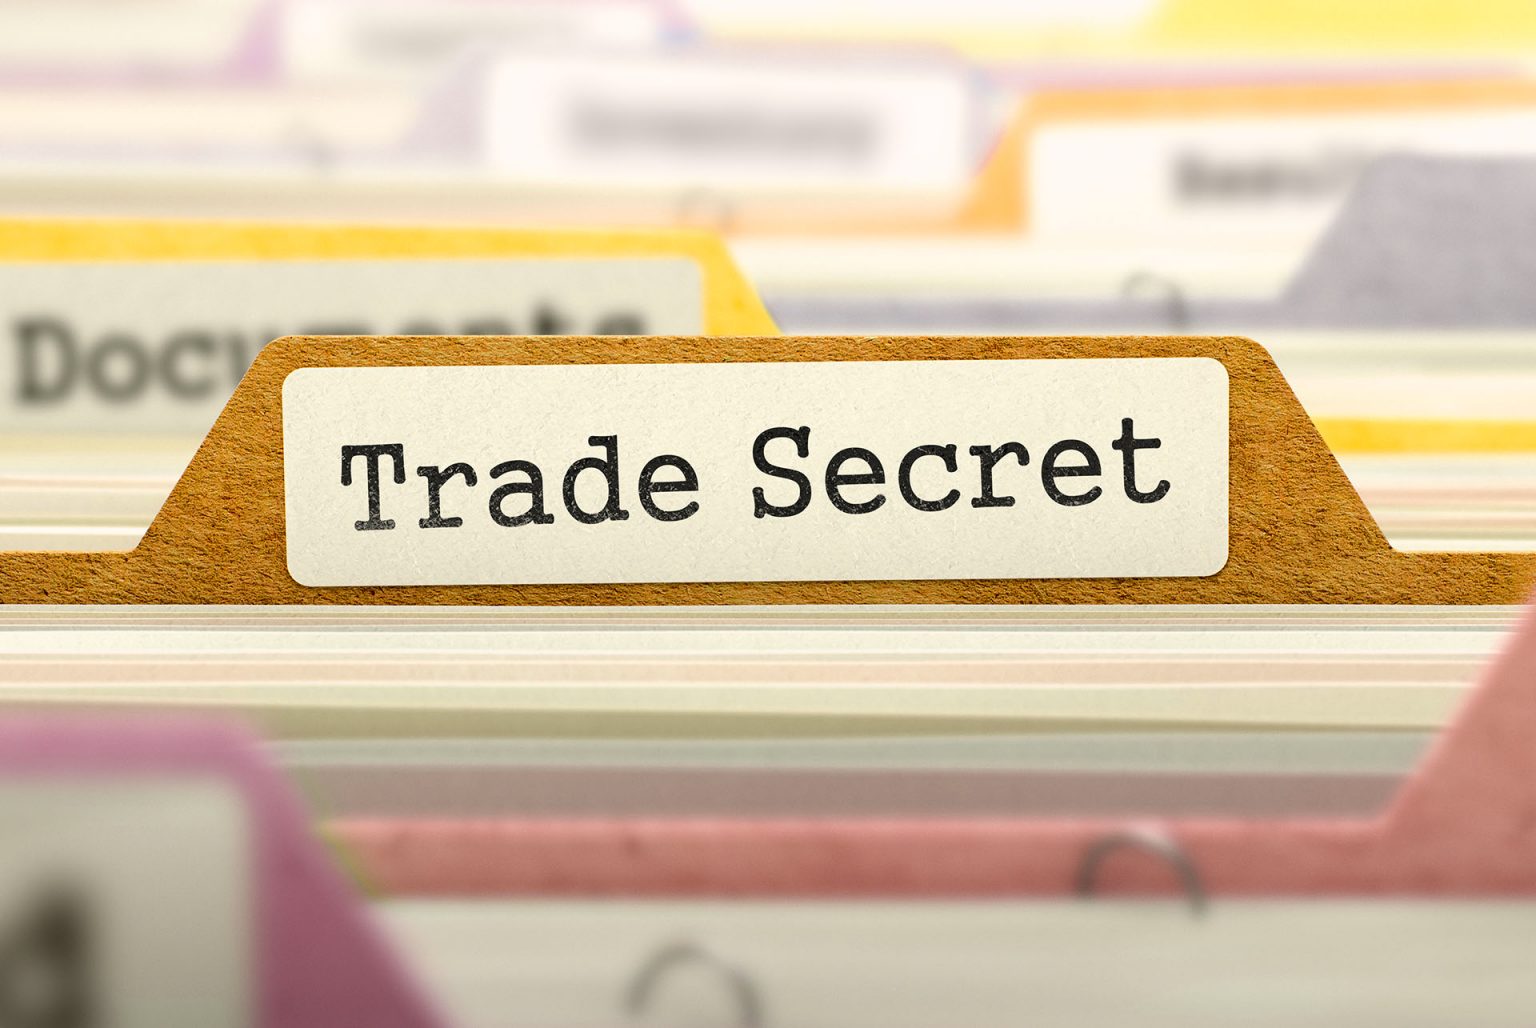 Trade Secret Basics Protect Your Company’s Confidential Information